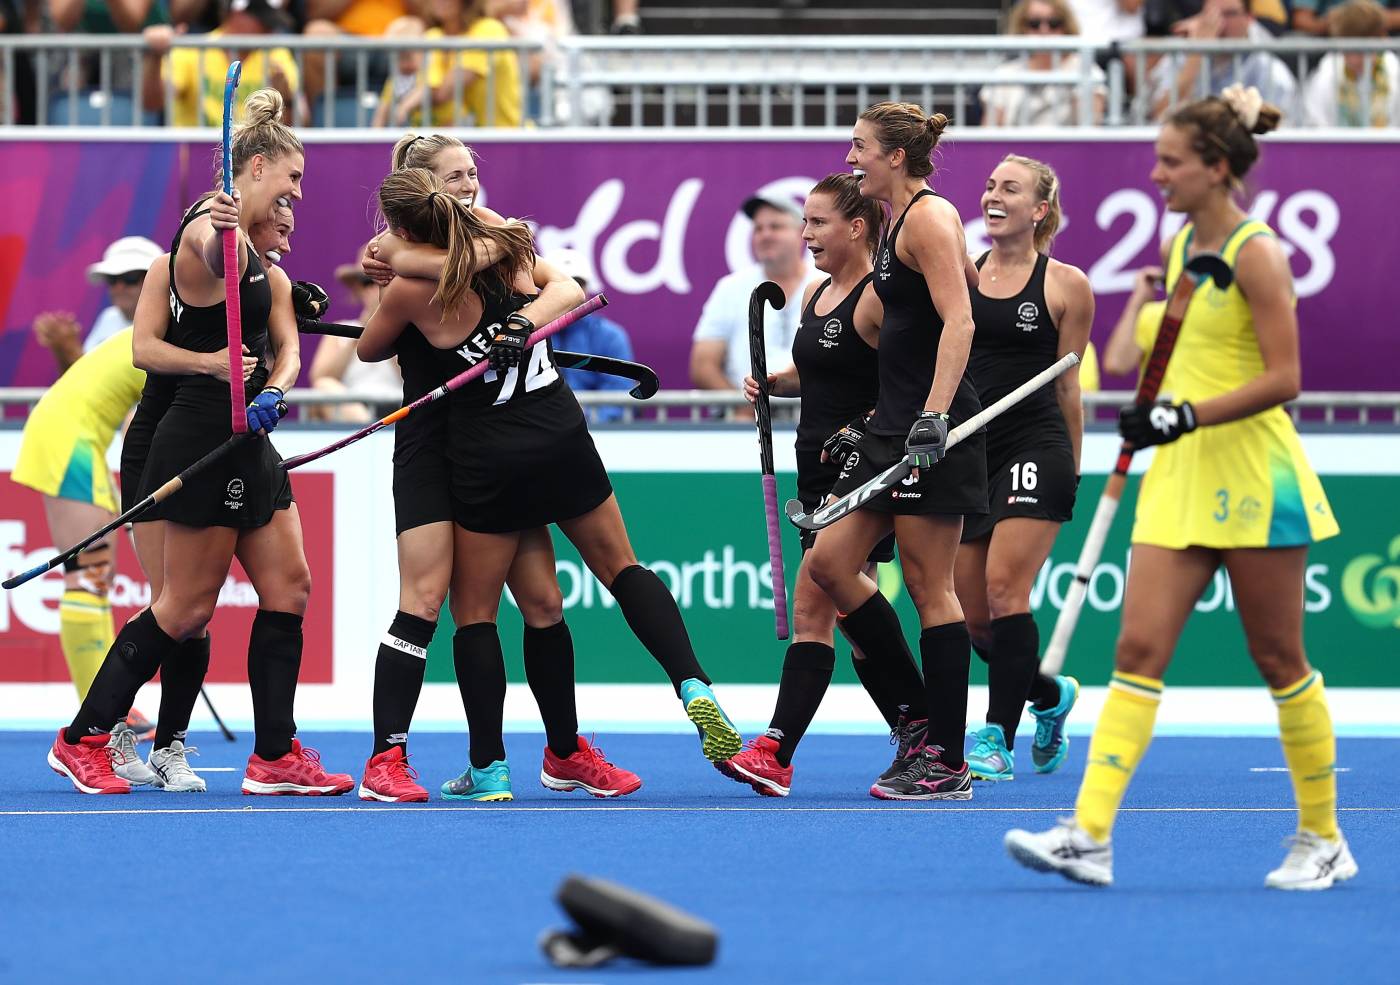 Hockey Commonwealth Games Day 10 at Gold Coast 2018 New Zealand